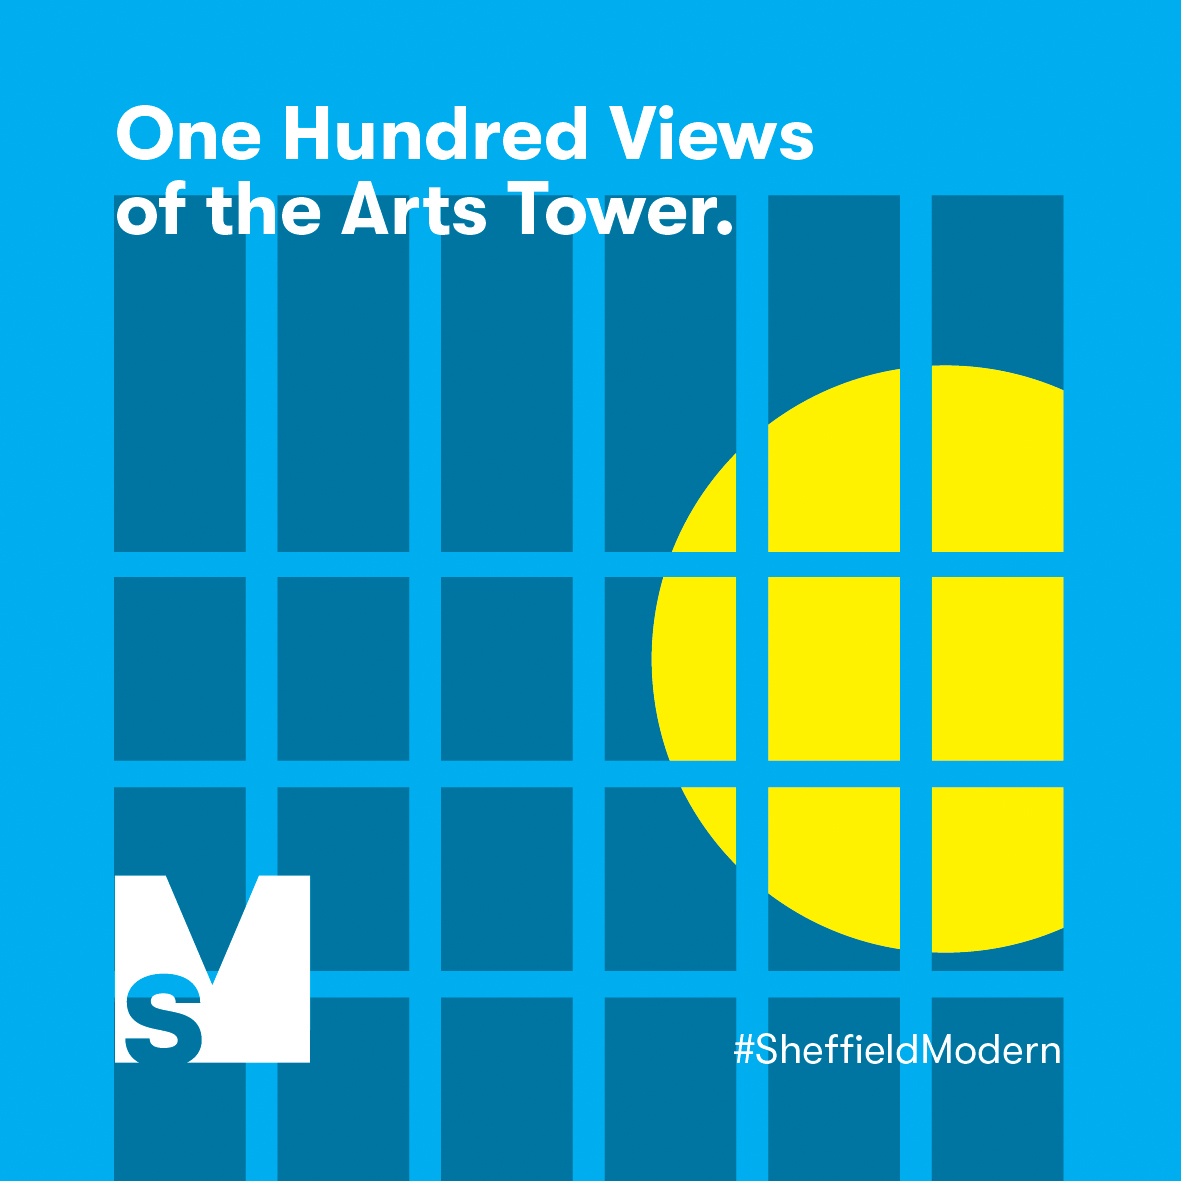 Exhibition: “One Hundred Views of the Arts Tower”